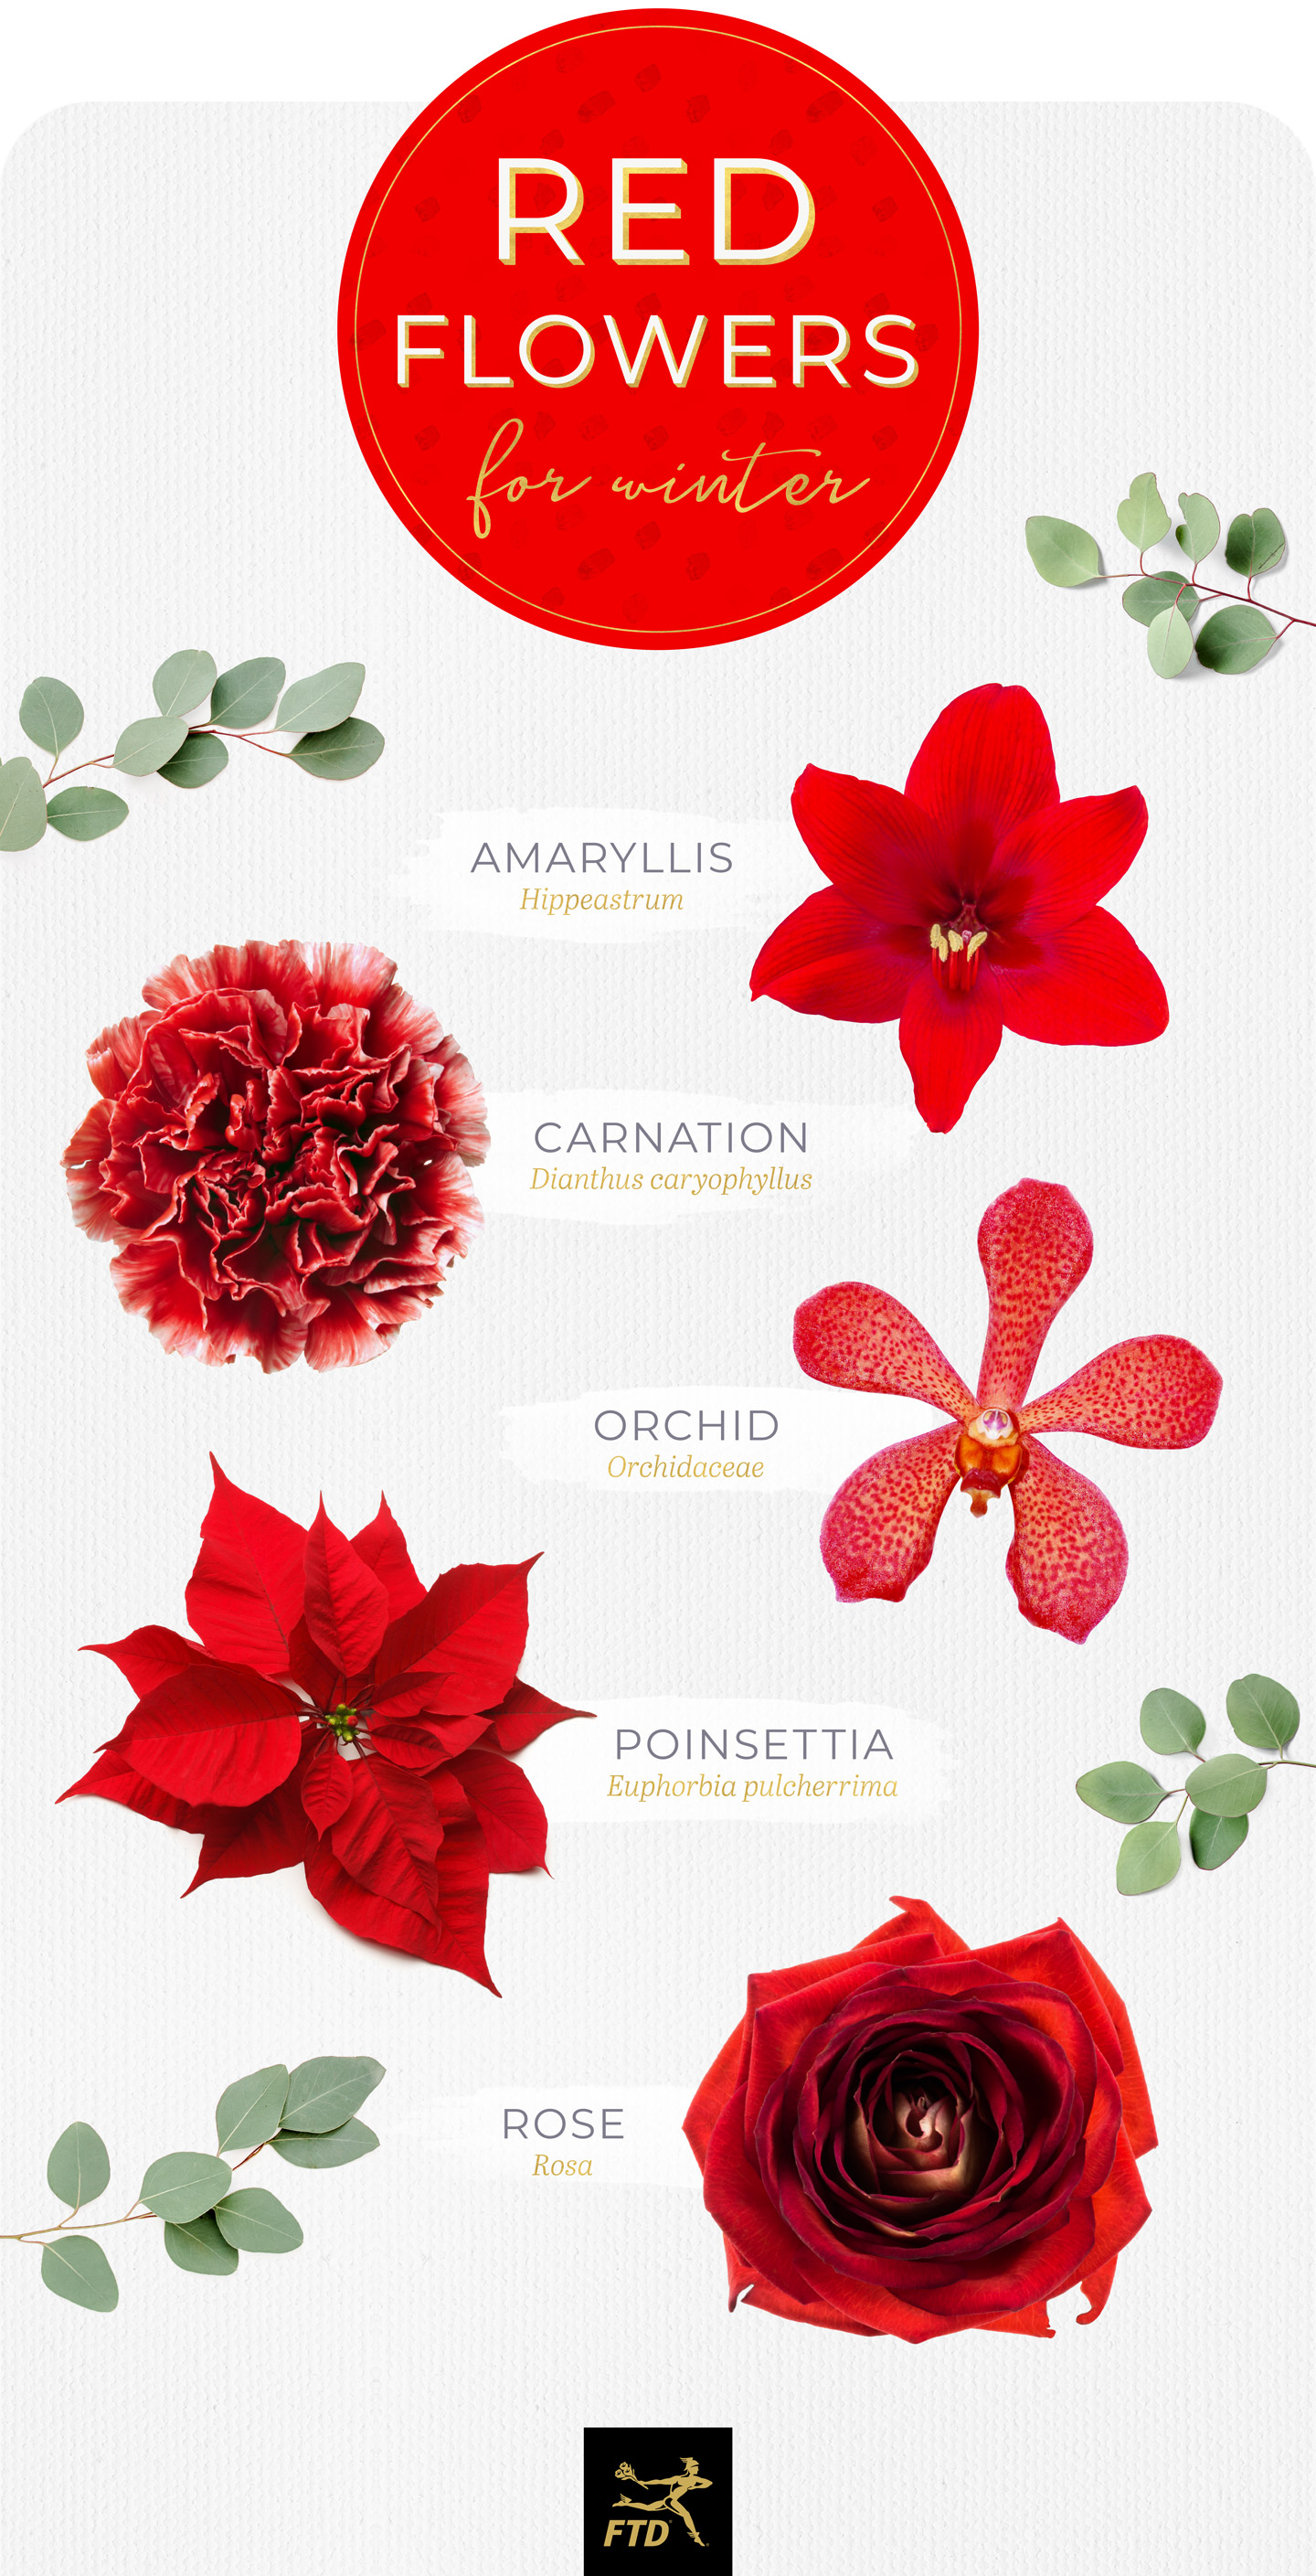 40 Types Of Red Flowers Red Flower Names, Flower Images, 52% OFF